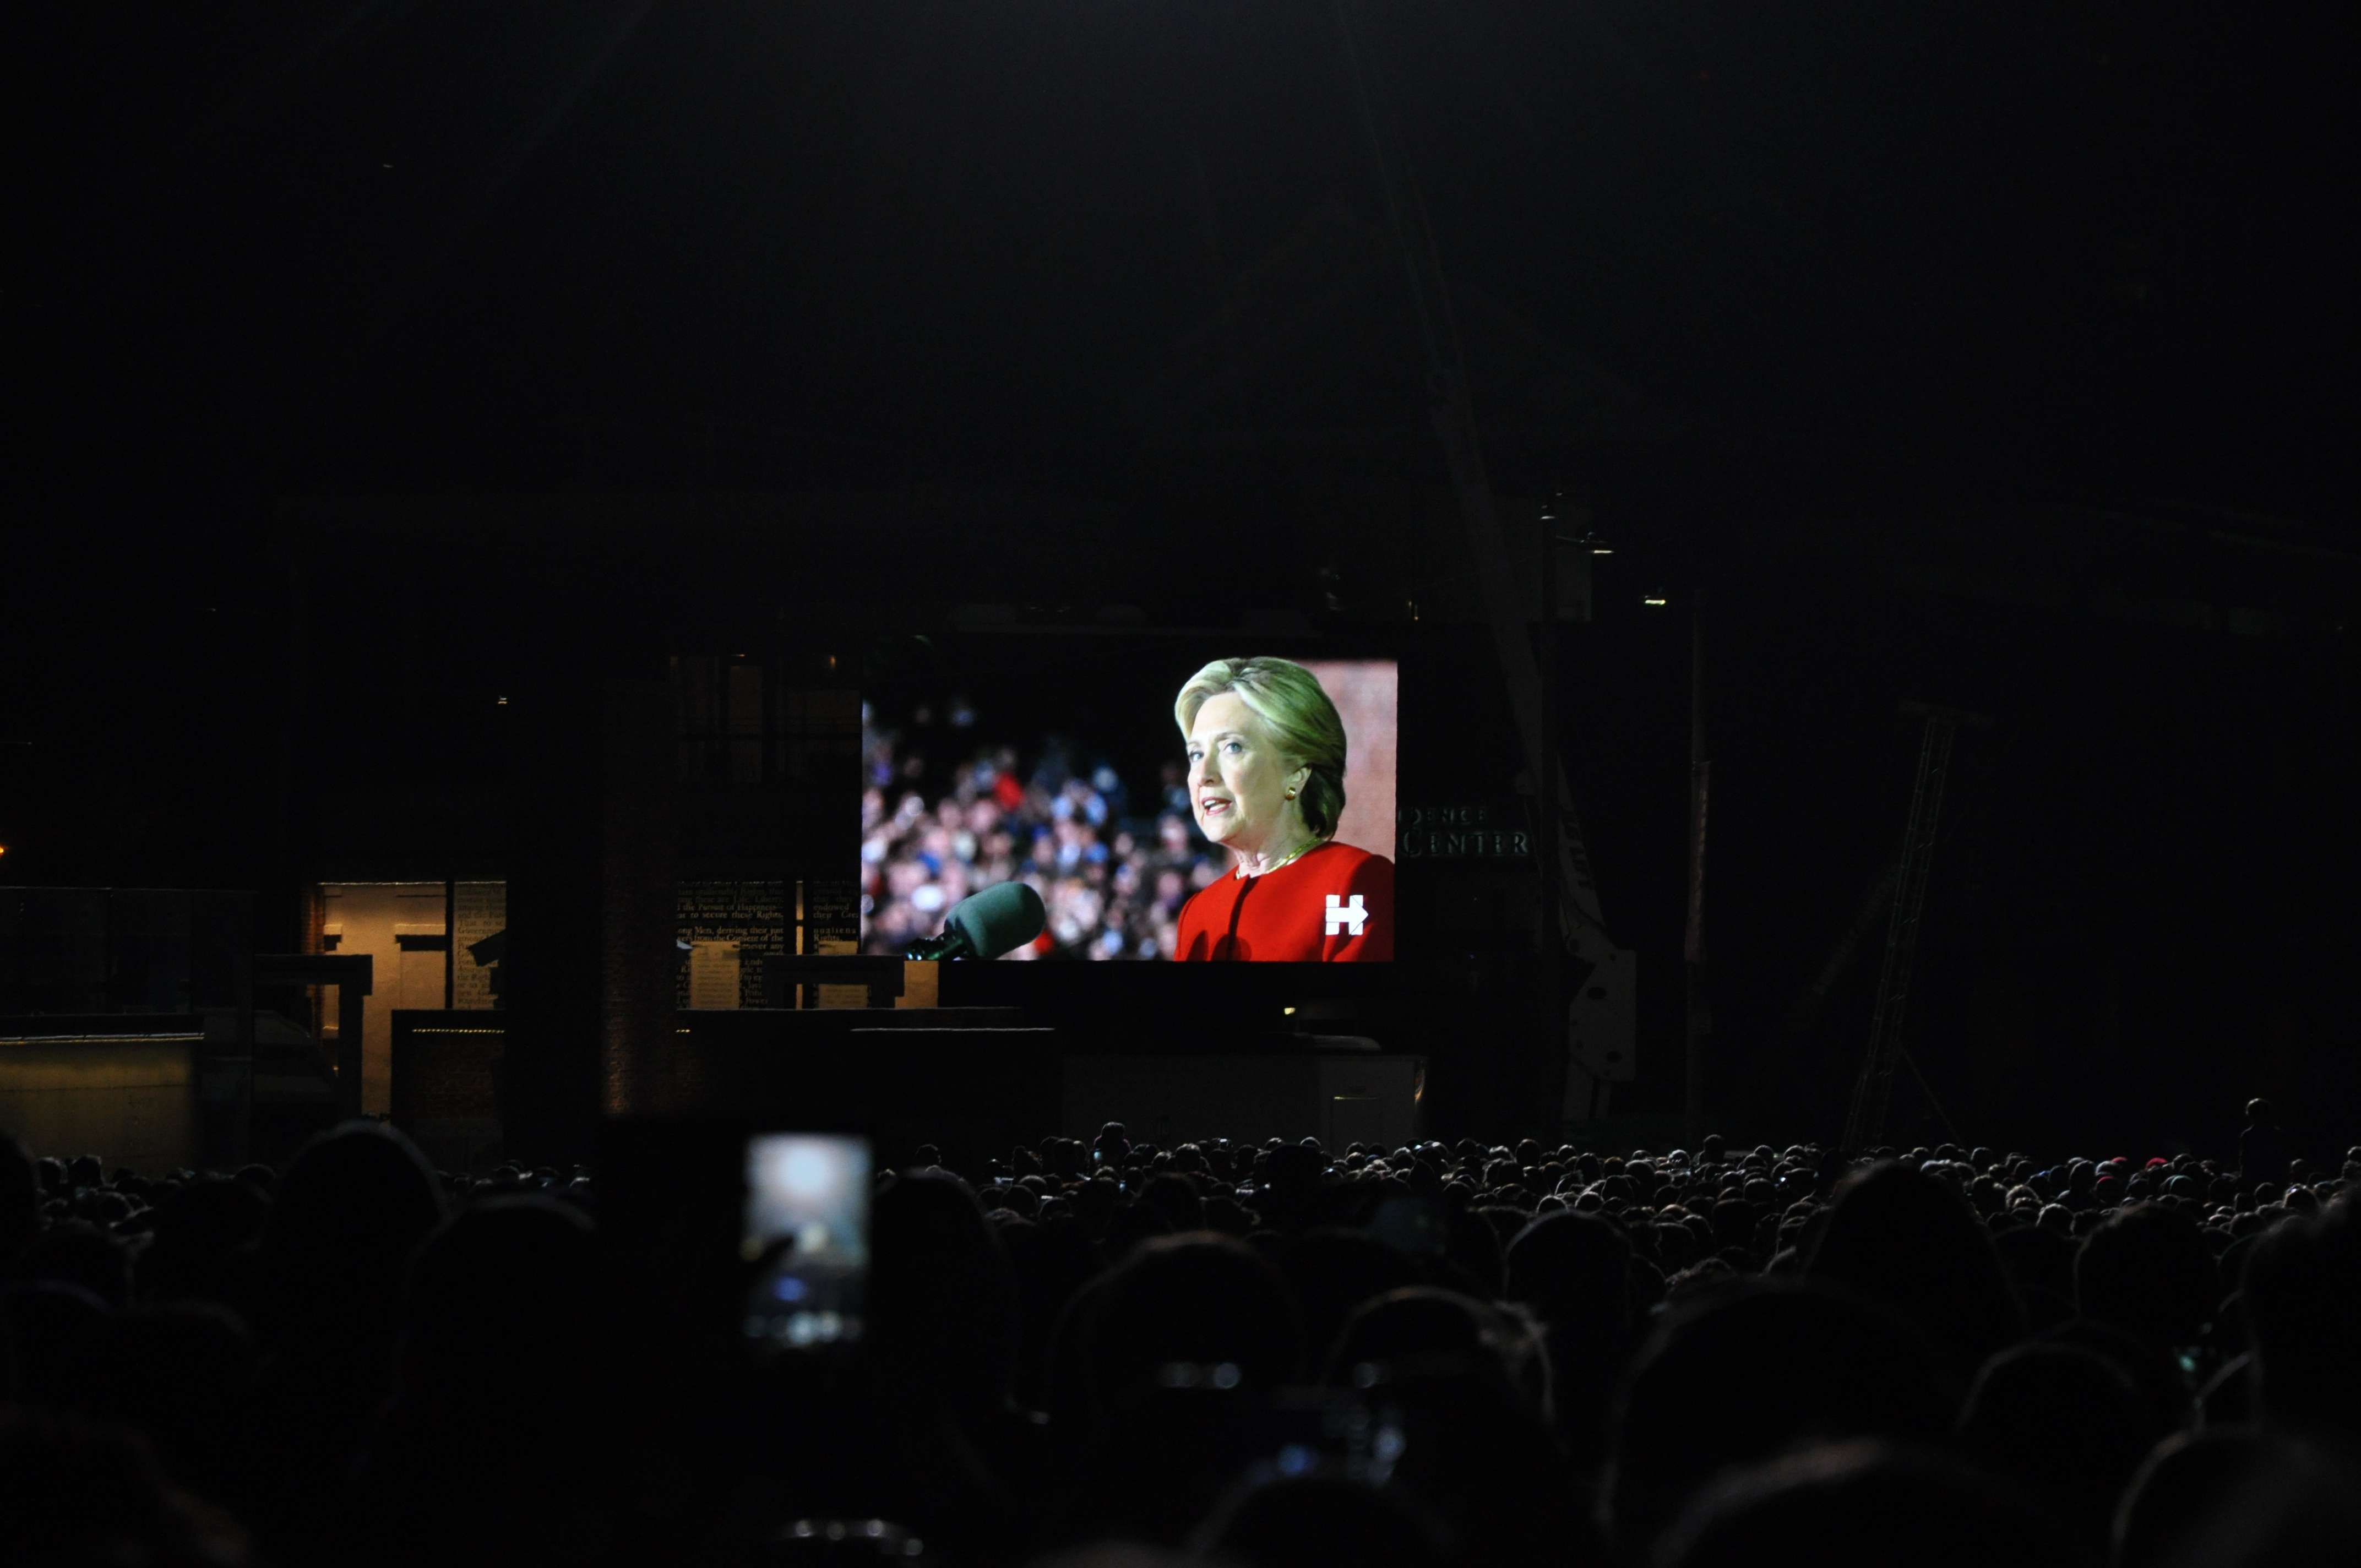 Democratic Party candidate Hillary Clinton speaks at her final rally on Monday night at Independence Mall, Philadelphia. Photo: Liu Zhen